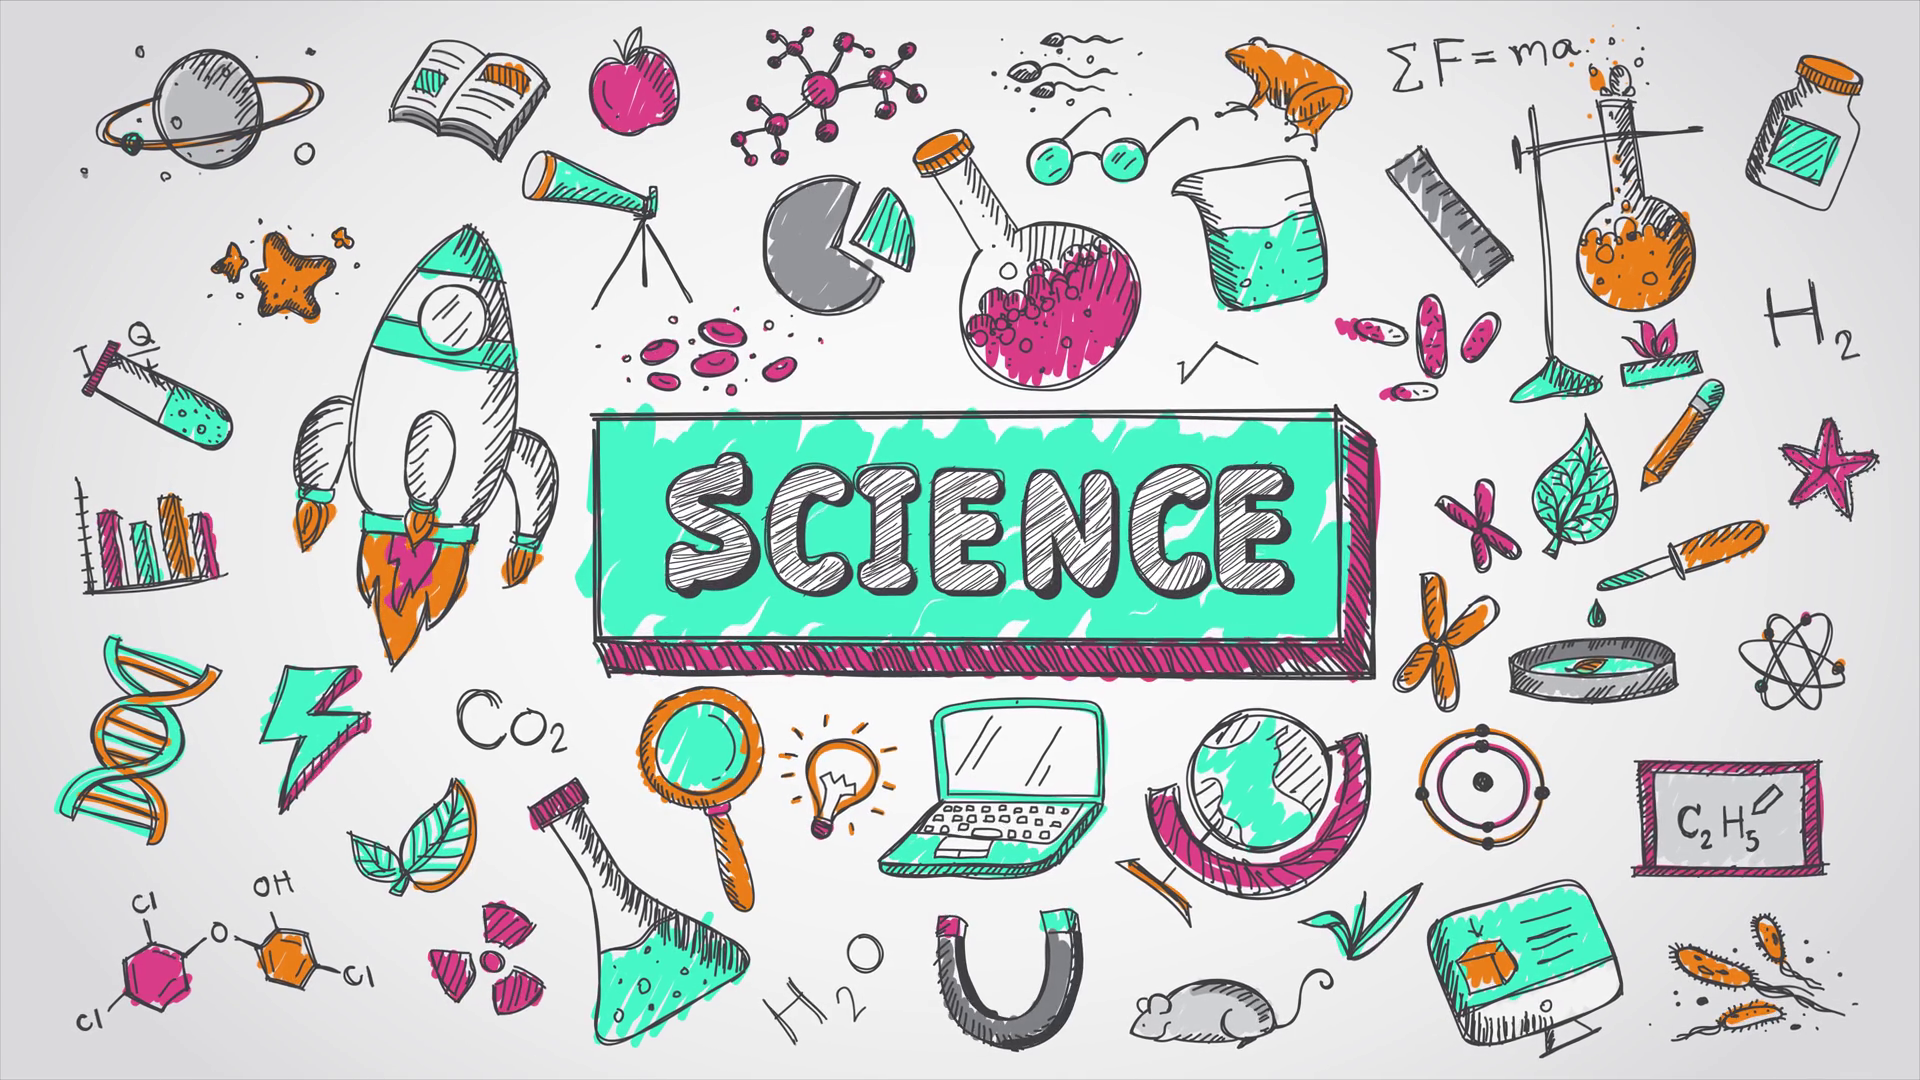 Image Result For Biology - Science Youtube Channel Art - 1920x1080  Wallpaper 